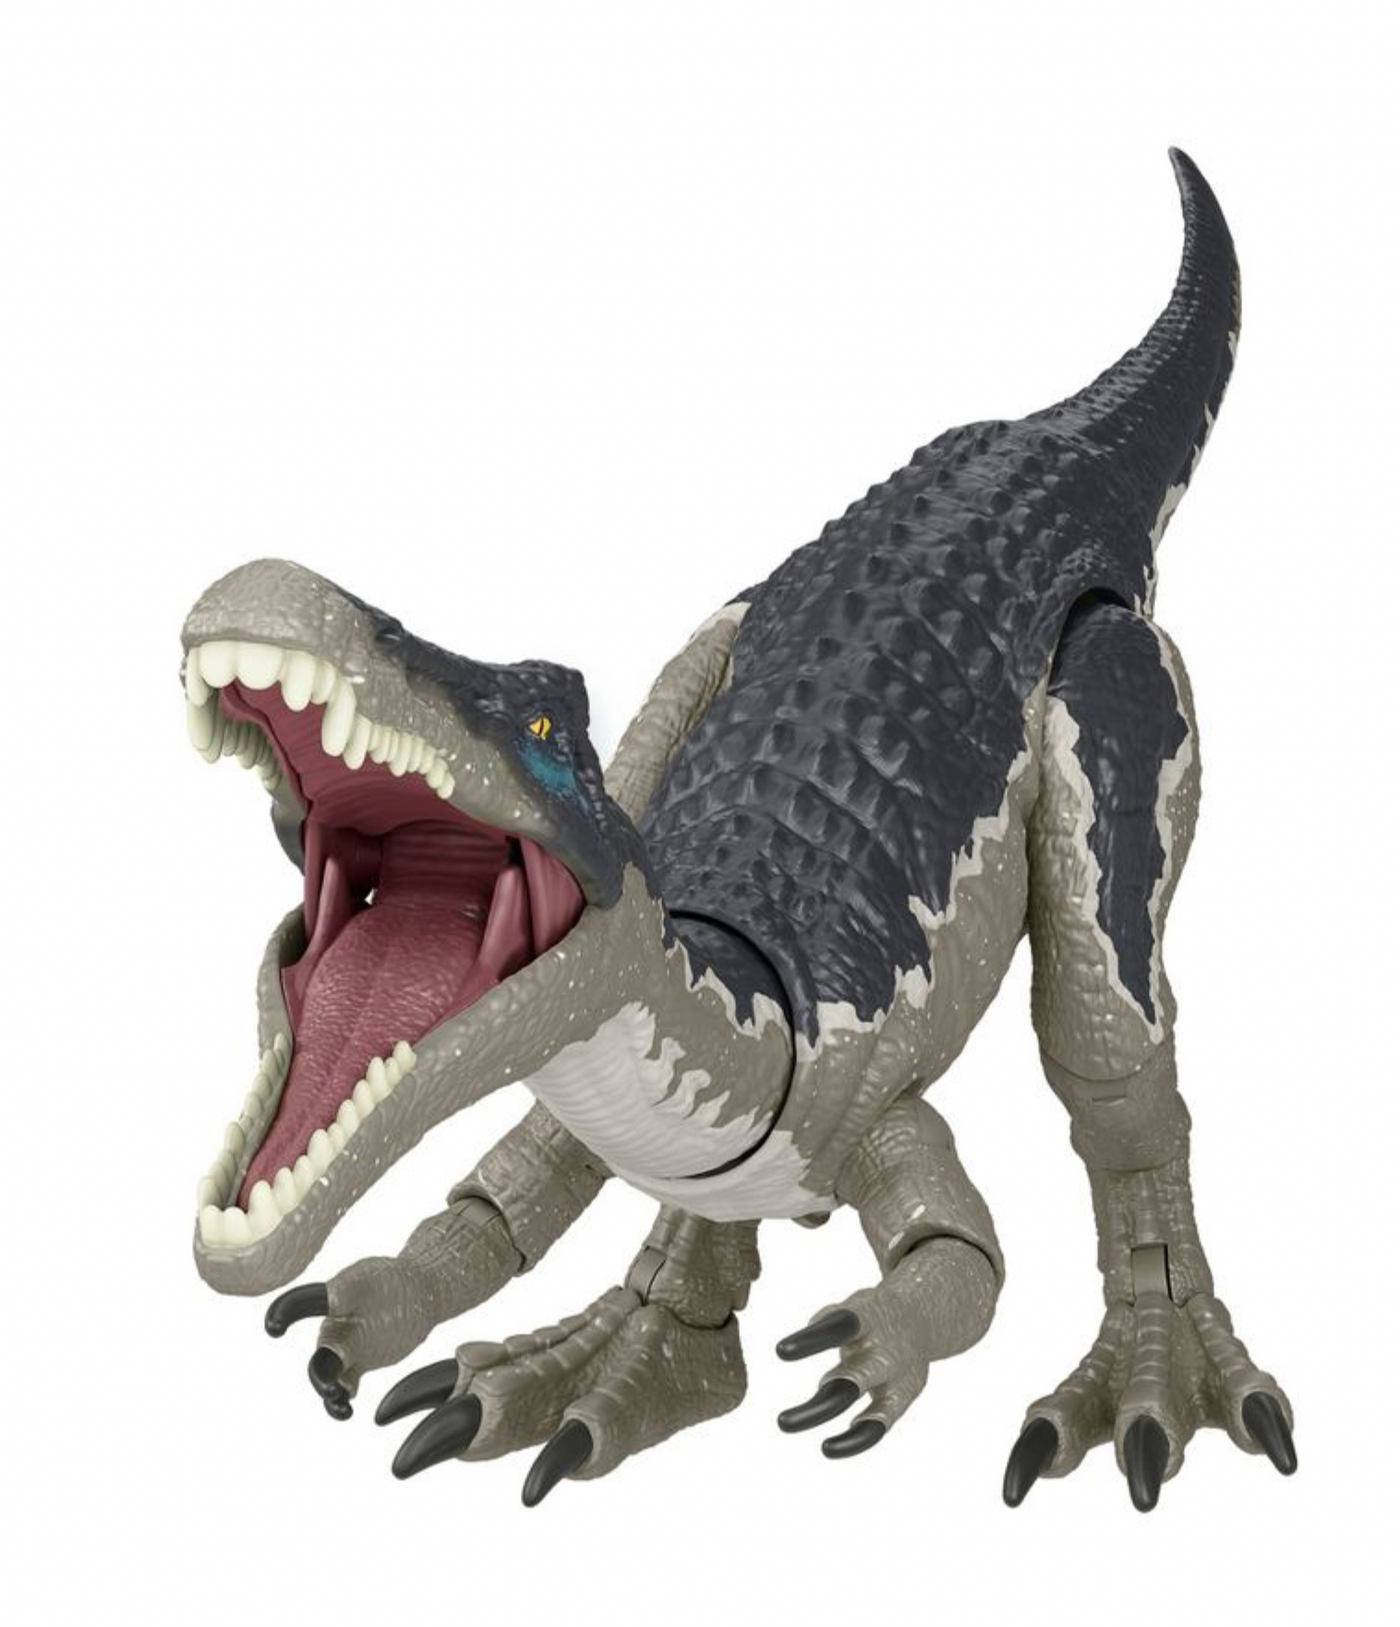 Jurassic World Hammond Collection Baryonyx Figure Target Exclusive New